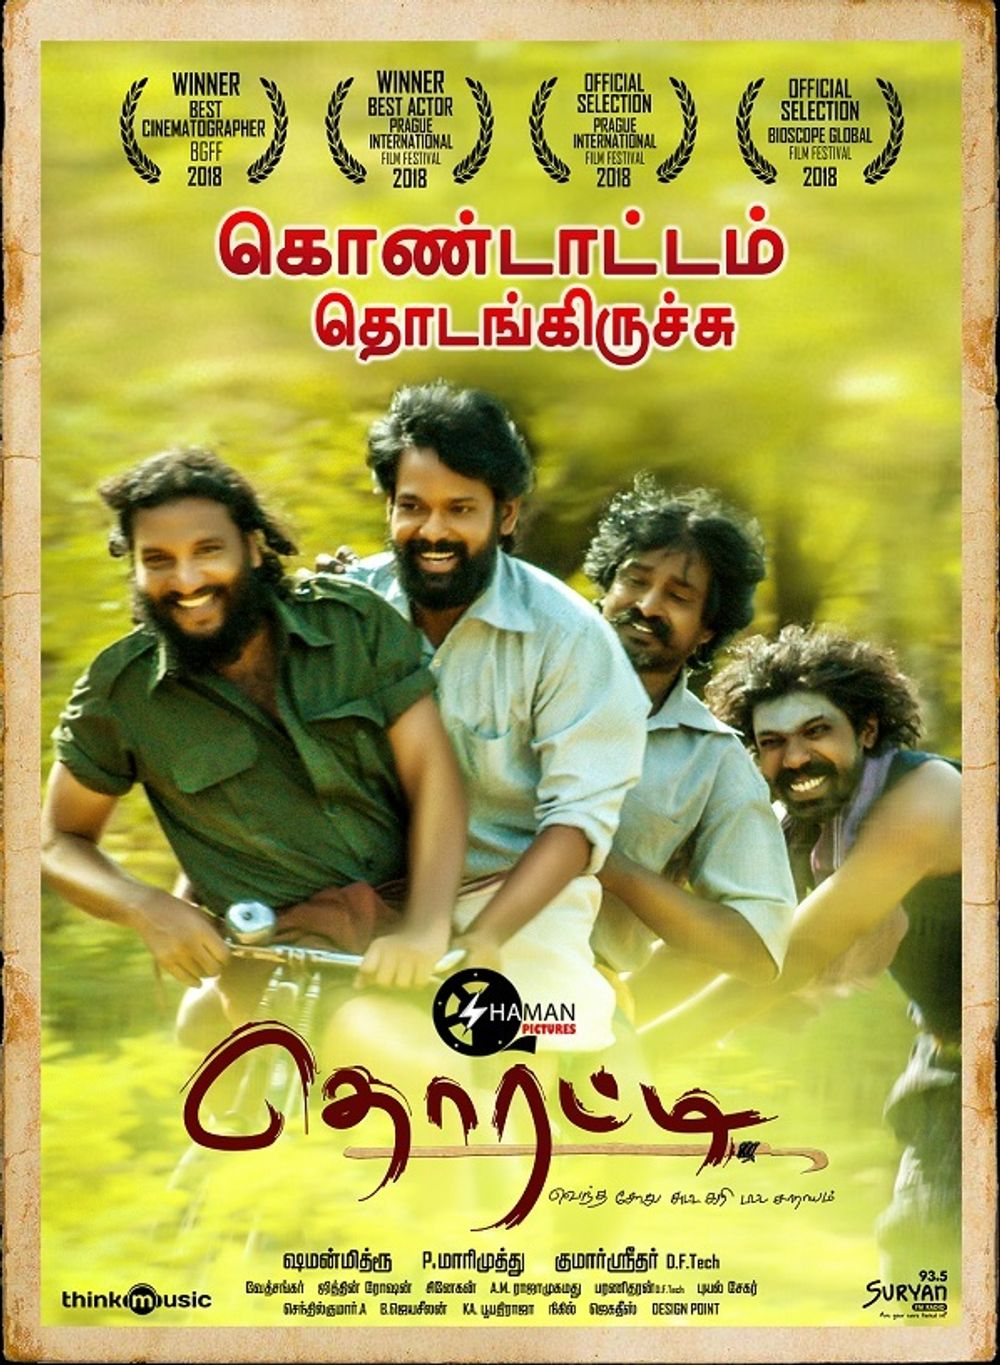 New film directed by Marimuthu and starring Sasikumar